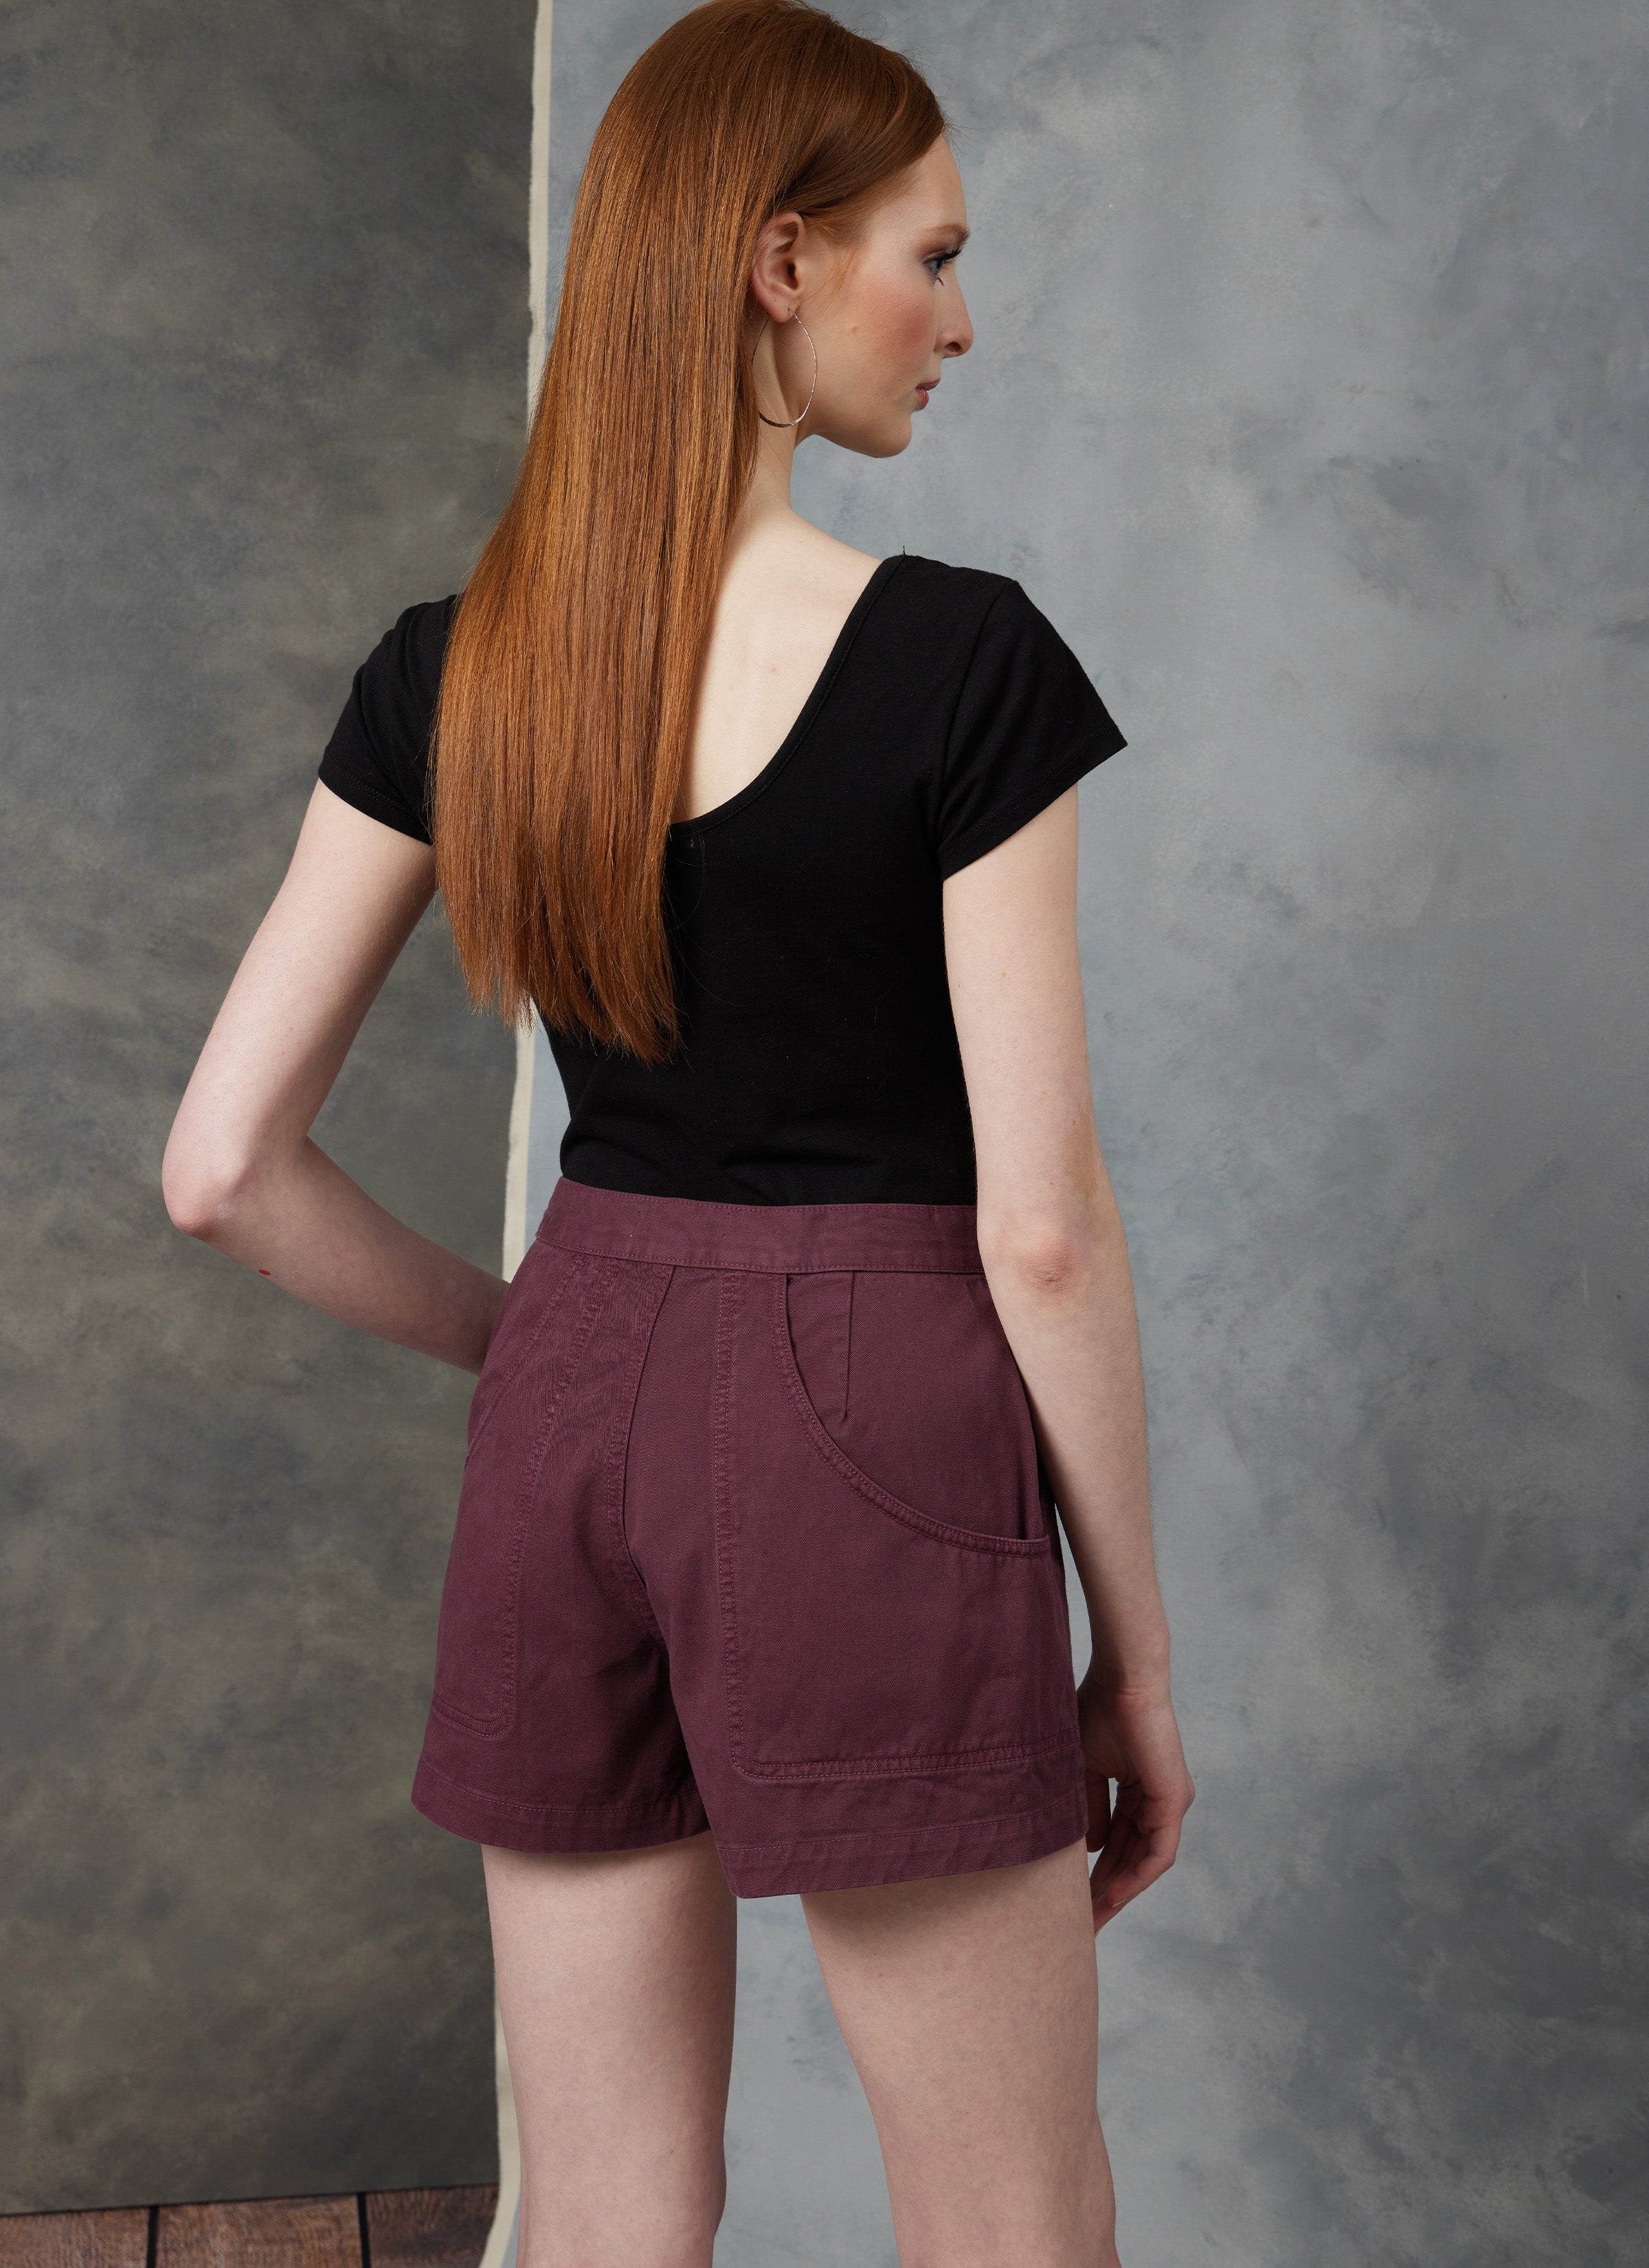 Vogue sewing pattern 1912 Misses' Top and Shorts by Rachel Comey from Jaycotts Sewing Supplies